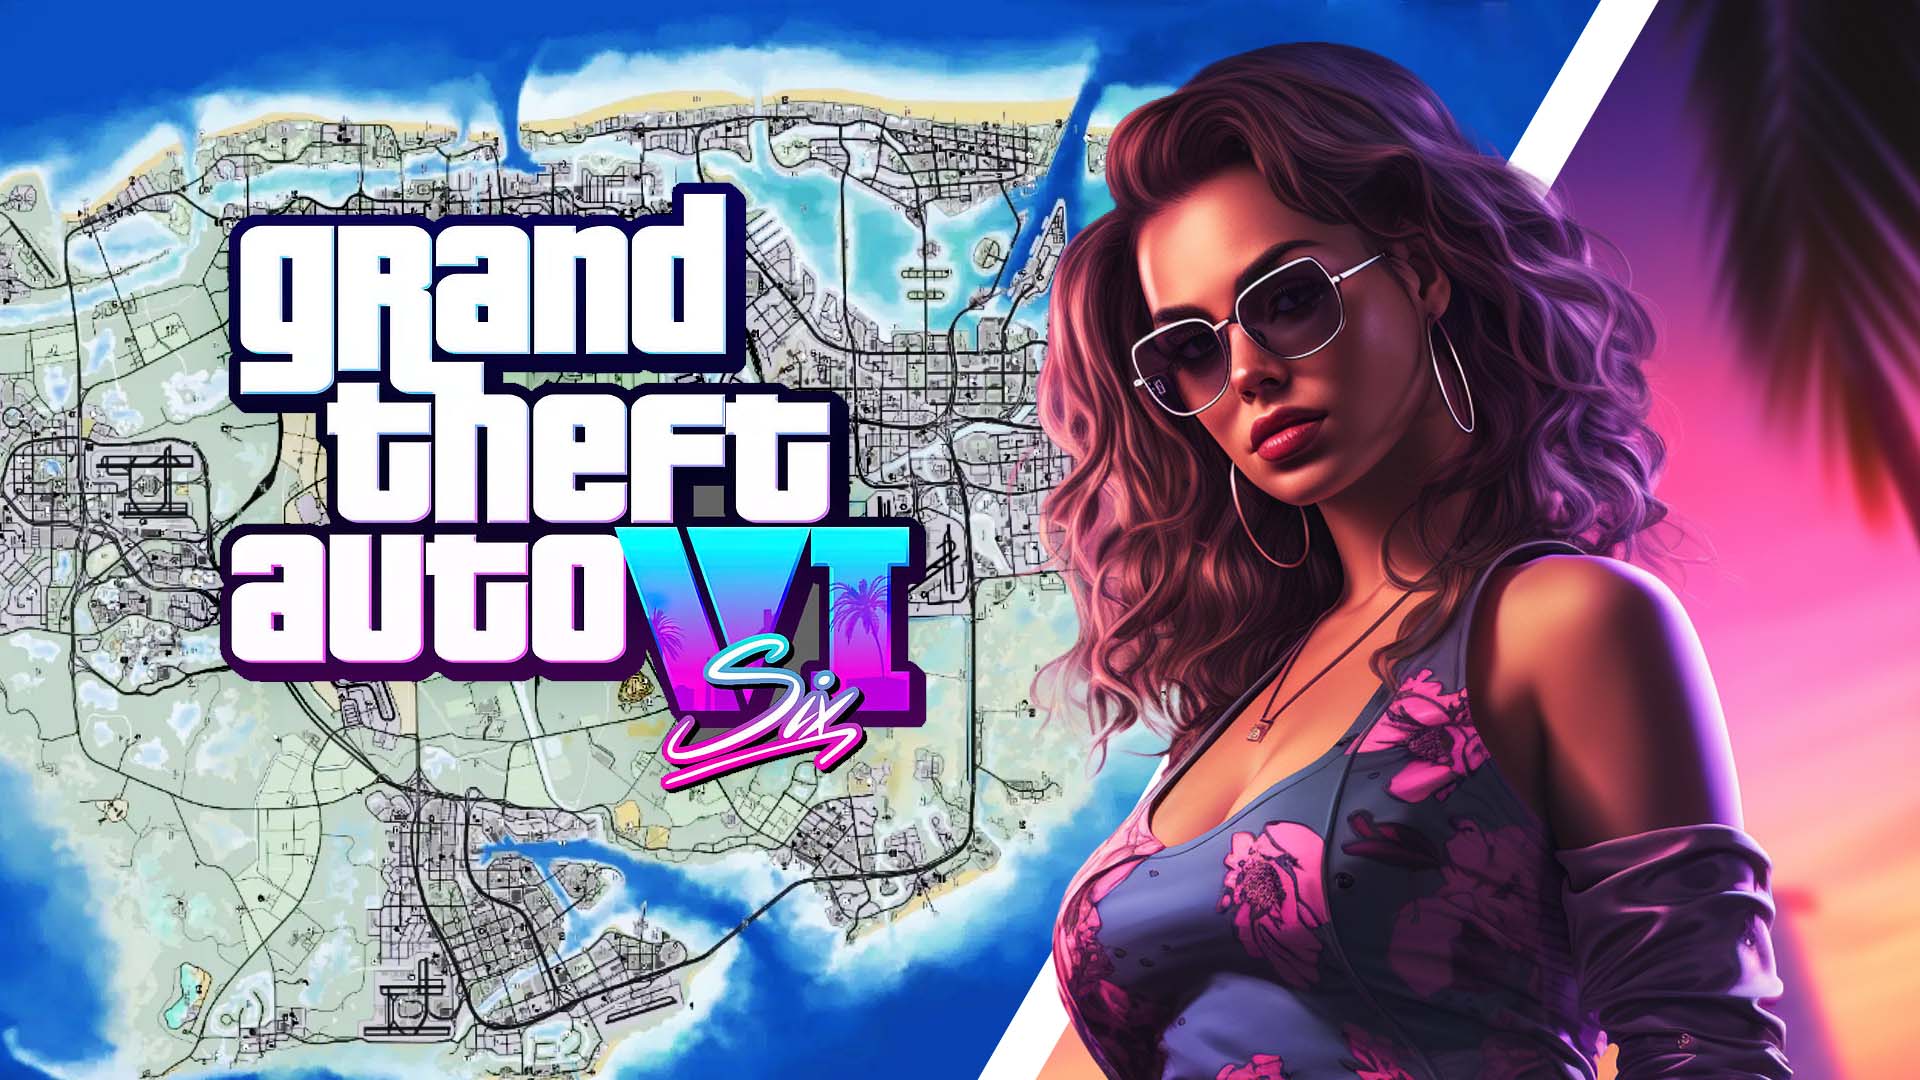 The GTA 6 trailer confirmed what we already knew: that GTA 6 leak was never  anything to worry about, and leaks are very often pointless